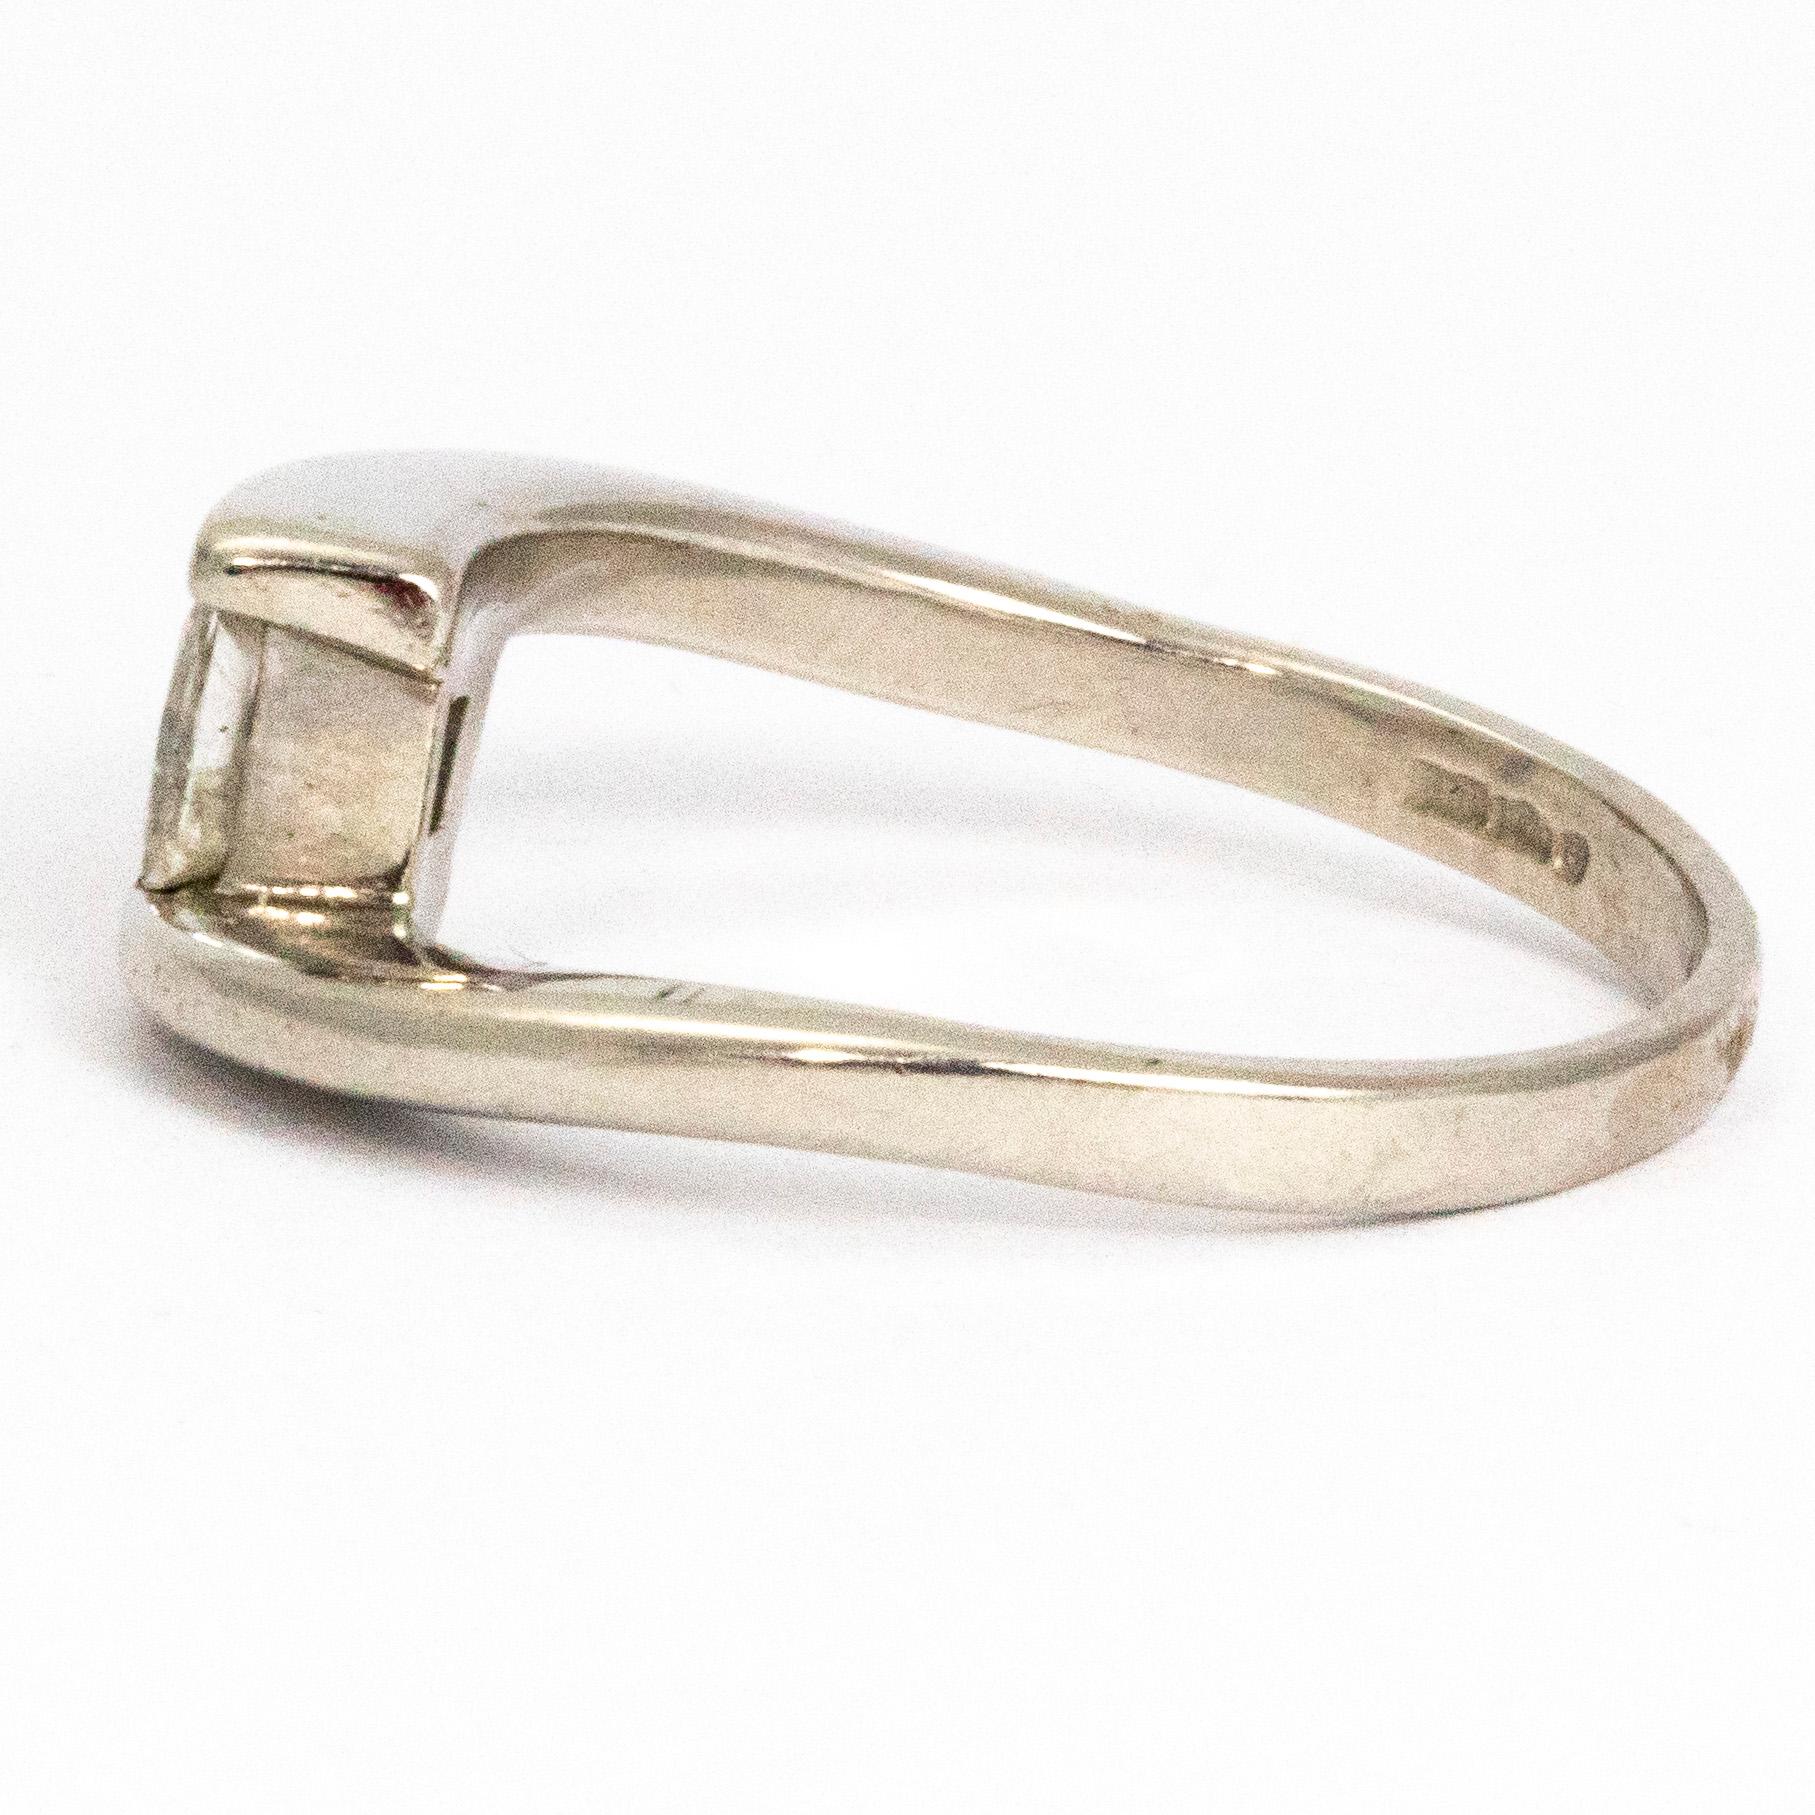 The princess cut diamond in this ring measures 40pts and is really beautiful. It is an H colour and has a gorgeous sparkle to it. The platinum band is wrap around which holds the diamond between the ends of the cross over band. 

Ring Size: N 1/2 or